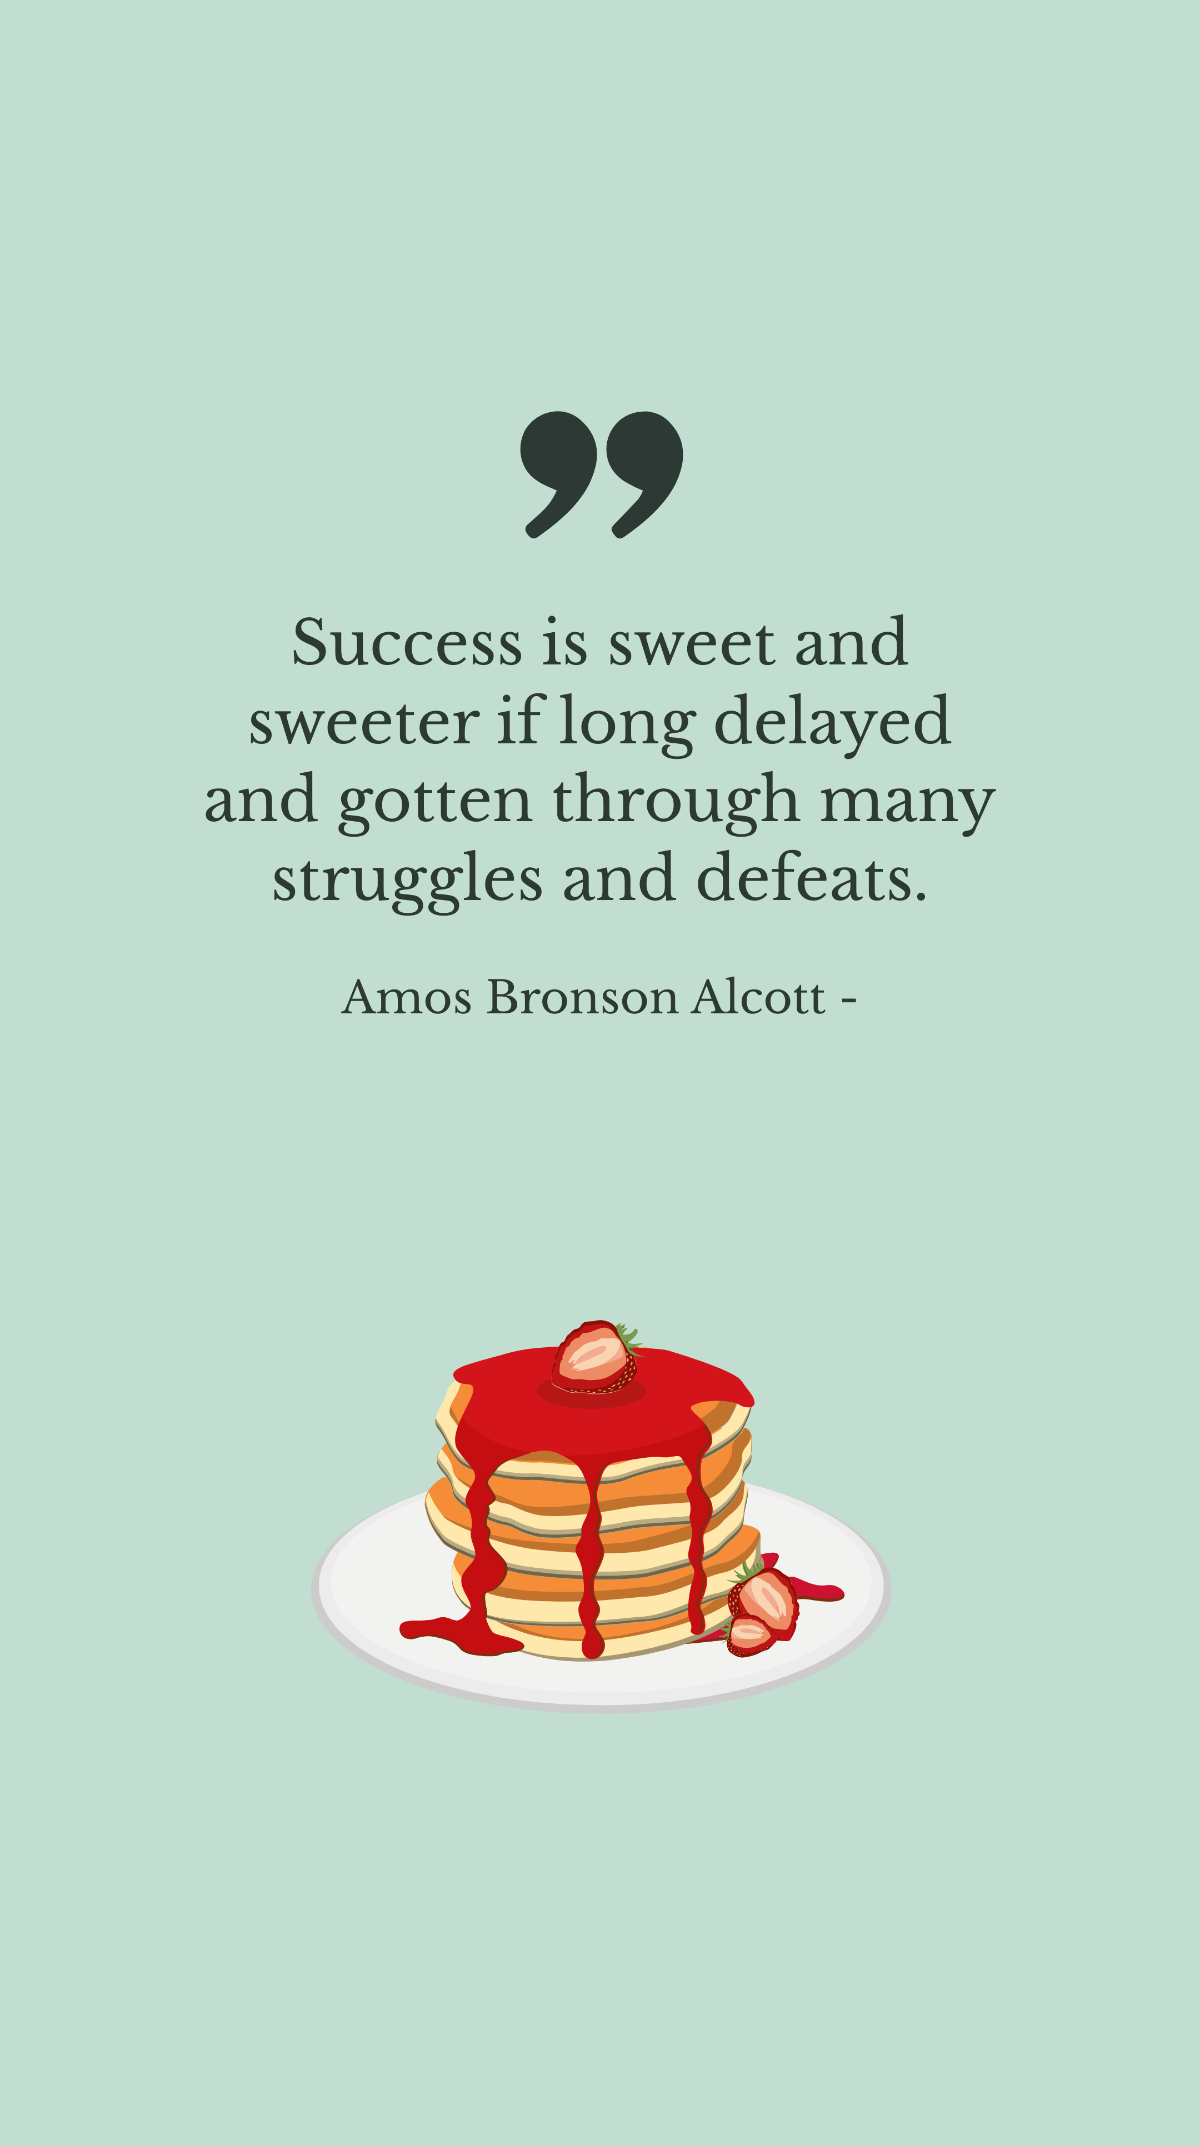 Amos Bronson Alcott - Success is sweet and sweeter if long delayed and gotten through many struggles and defeats. Template